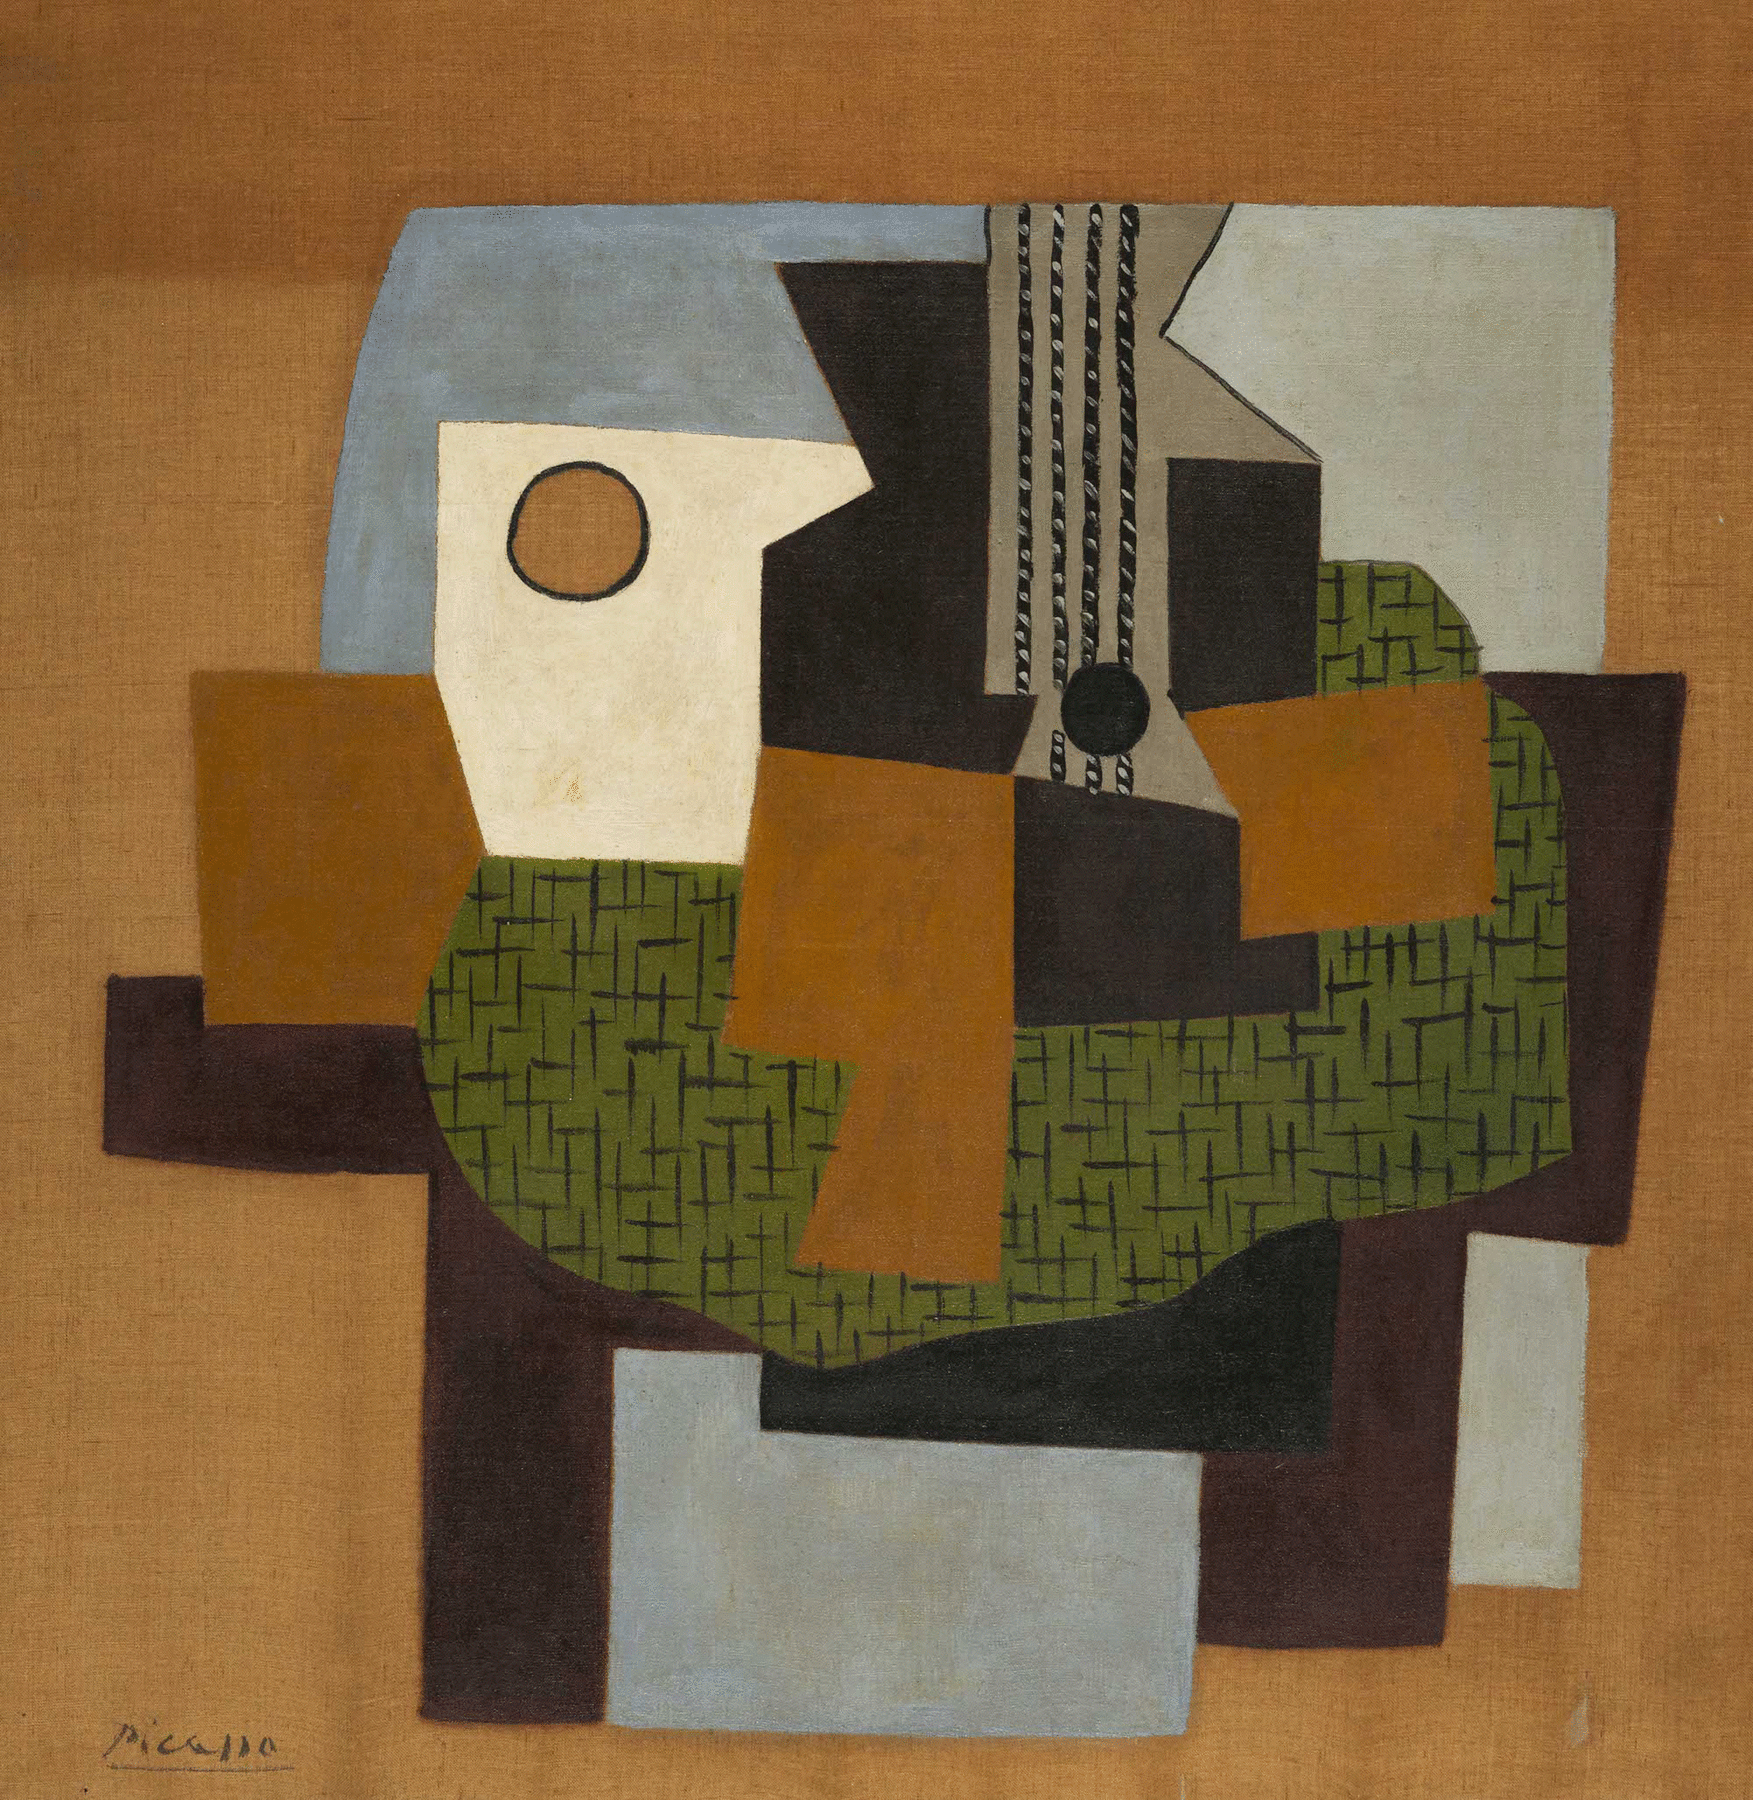 Pablo Picasso, Guitare sur une Table (verso: Le Portail, Fontainebleau) (Guitar on a Table), 1921. Oil on canvas 99 x 97.5 cm. (39 x 38 3/8 in.) &copy;Helly Nahmad Gallery NY